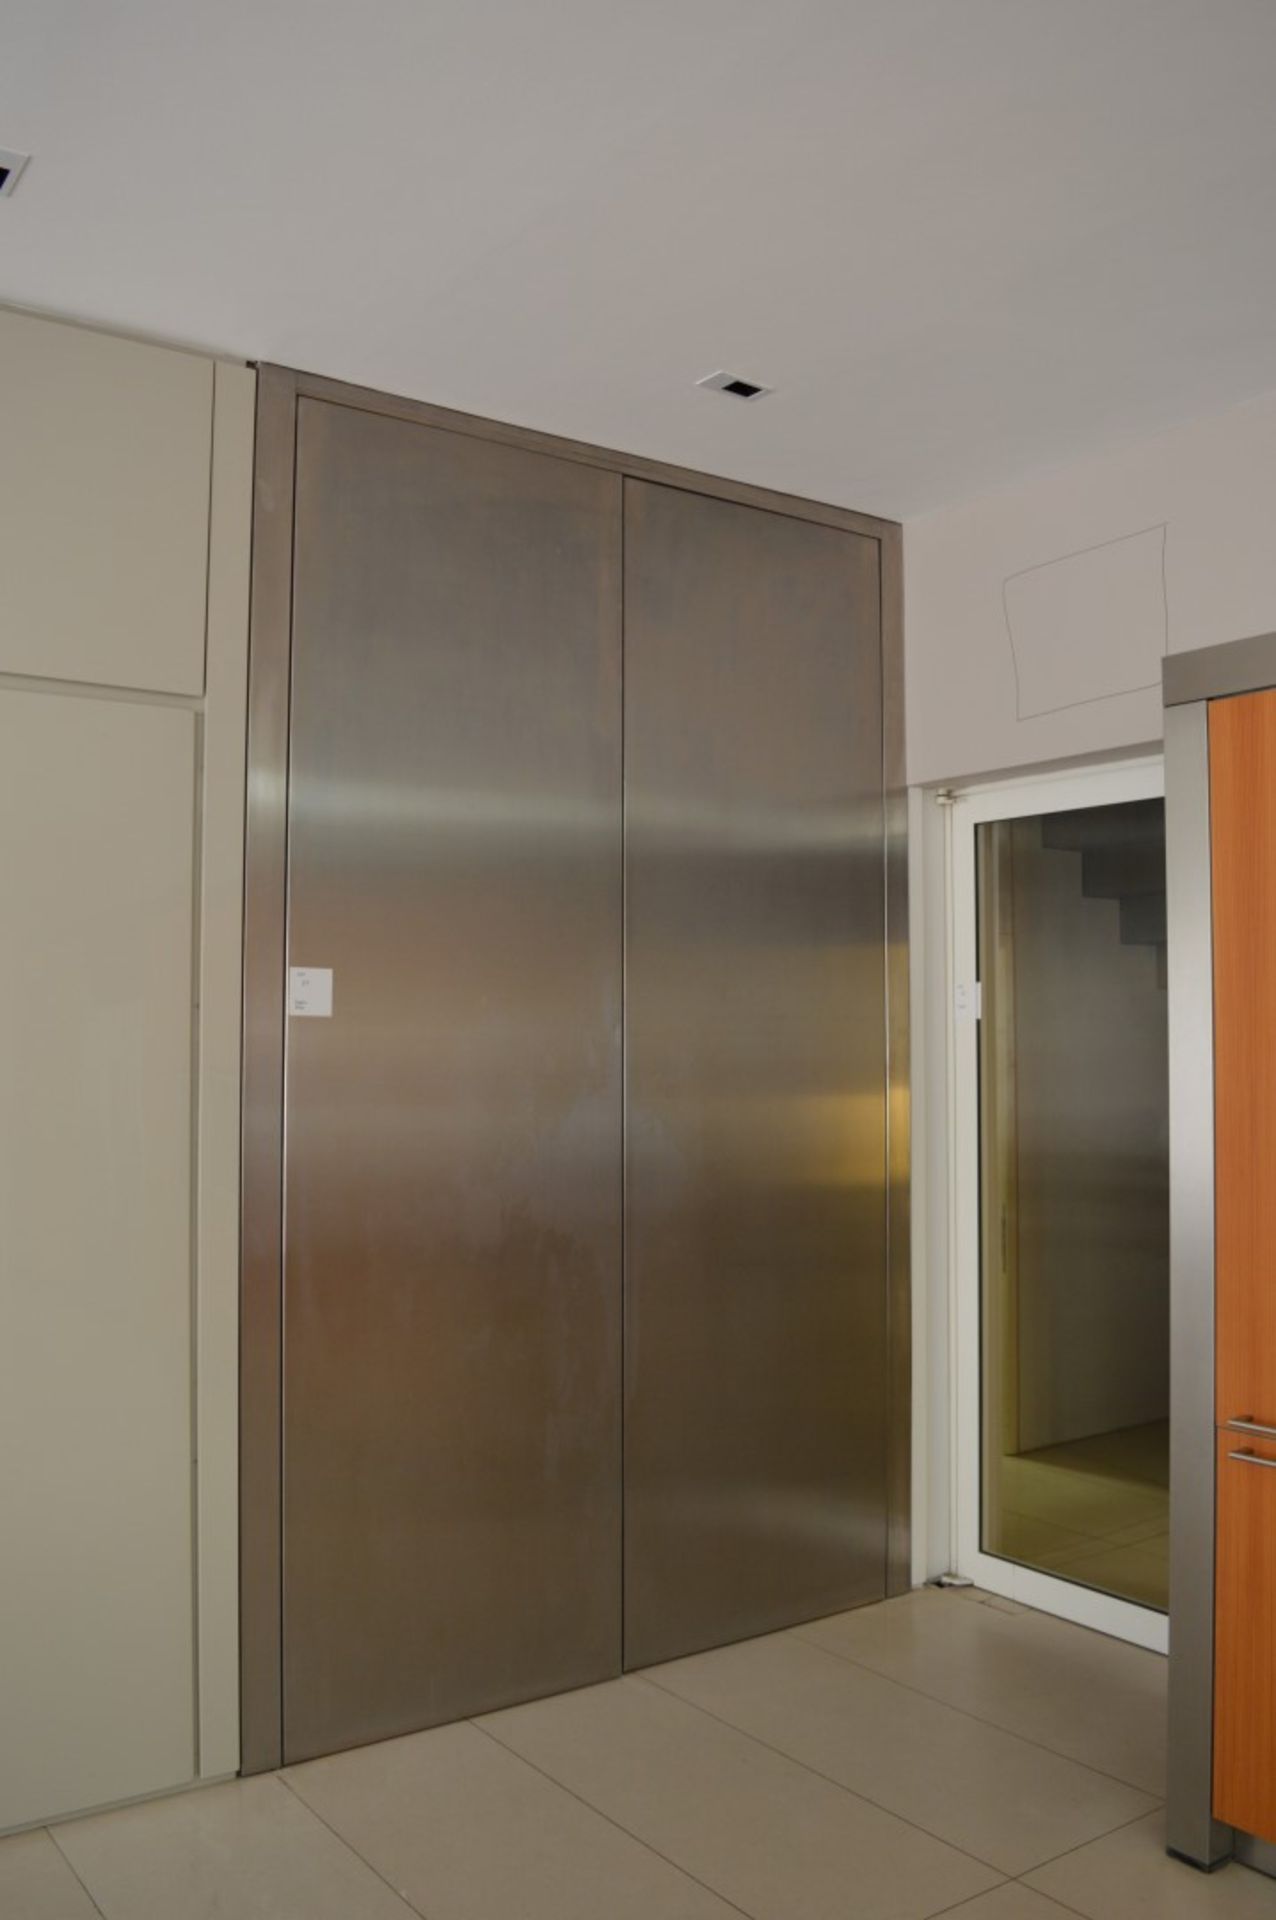 2 x Bespoke Internal Doors With Stainless Steel Finish - Pair of - Large Size - Ideal For Interior - Image 2 of 9